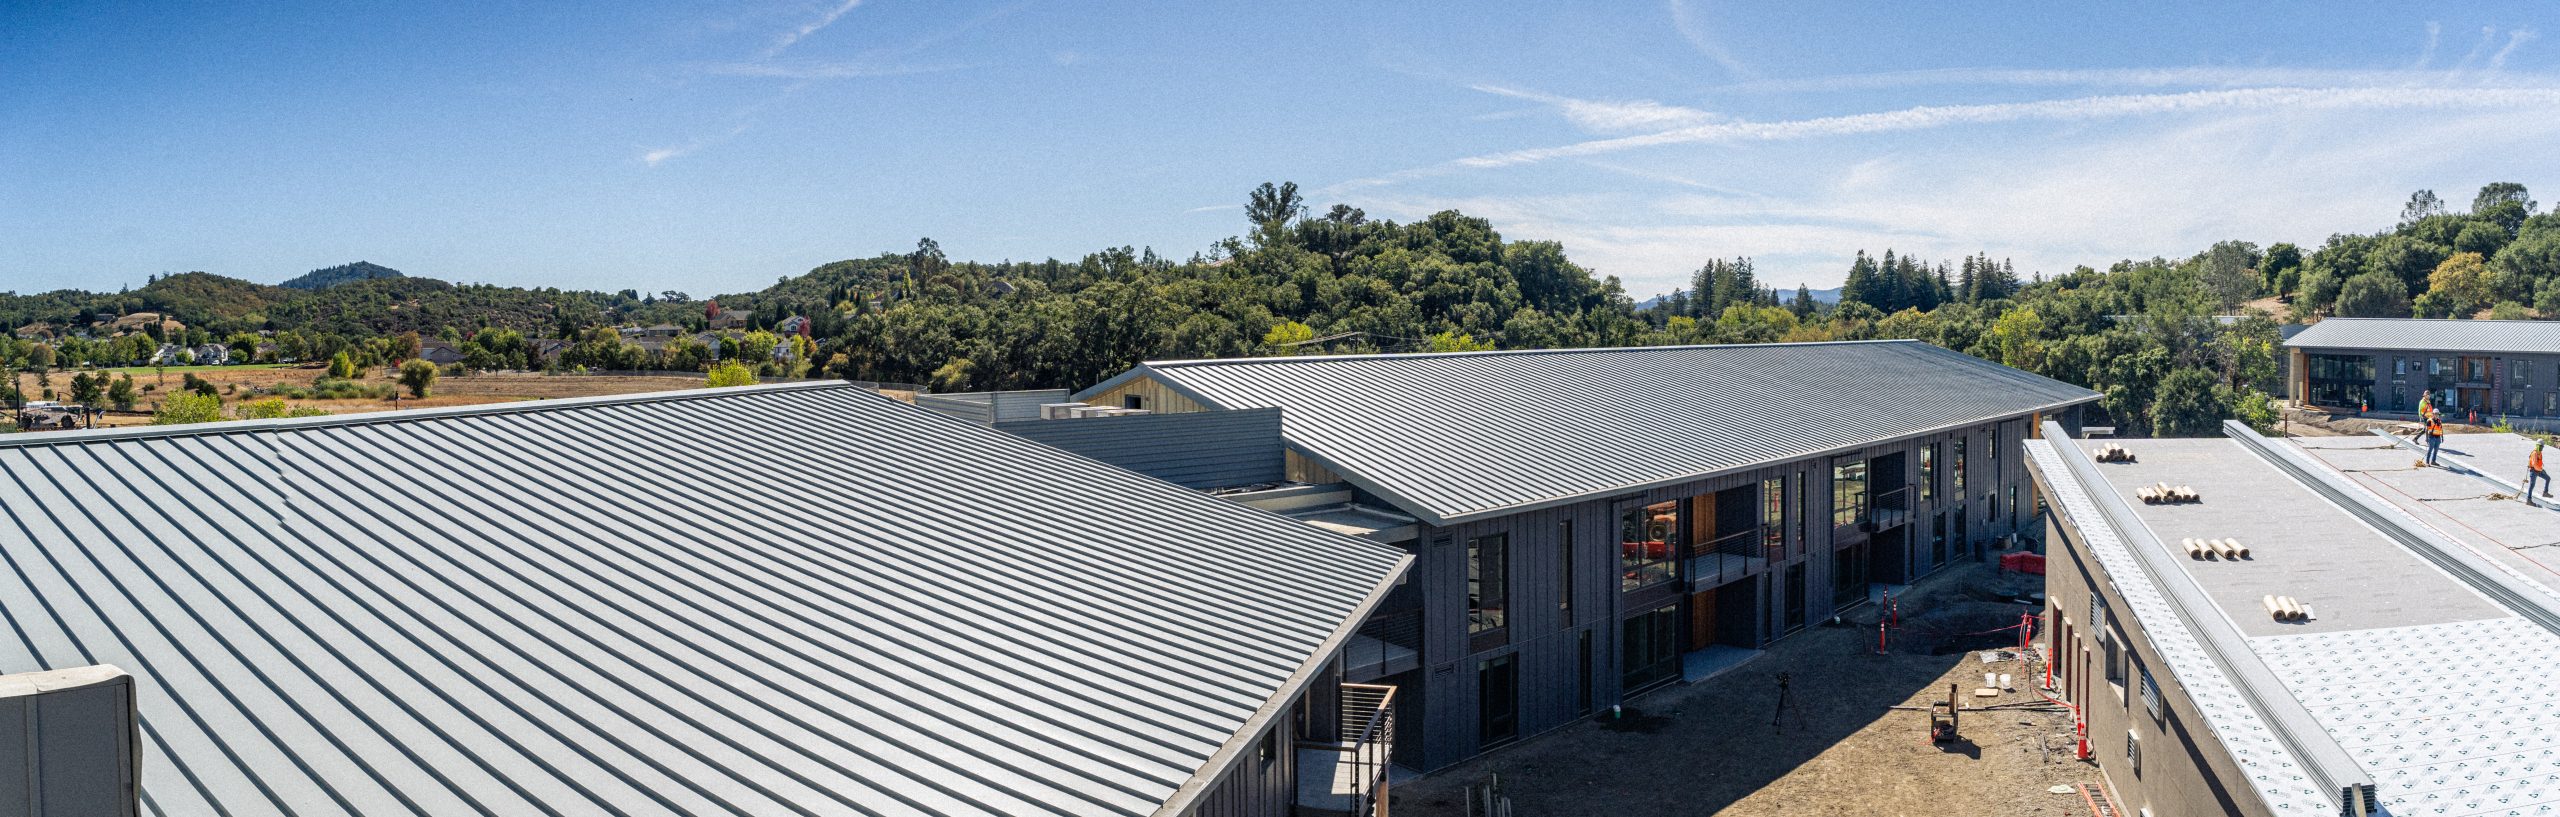 How To Choose The Right Roofing Material For Your Commercial Roof